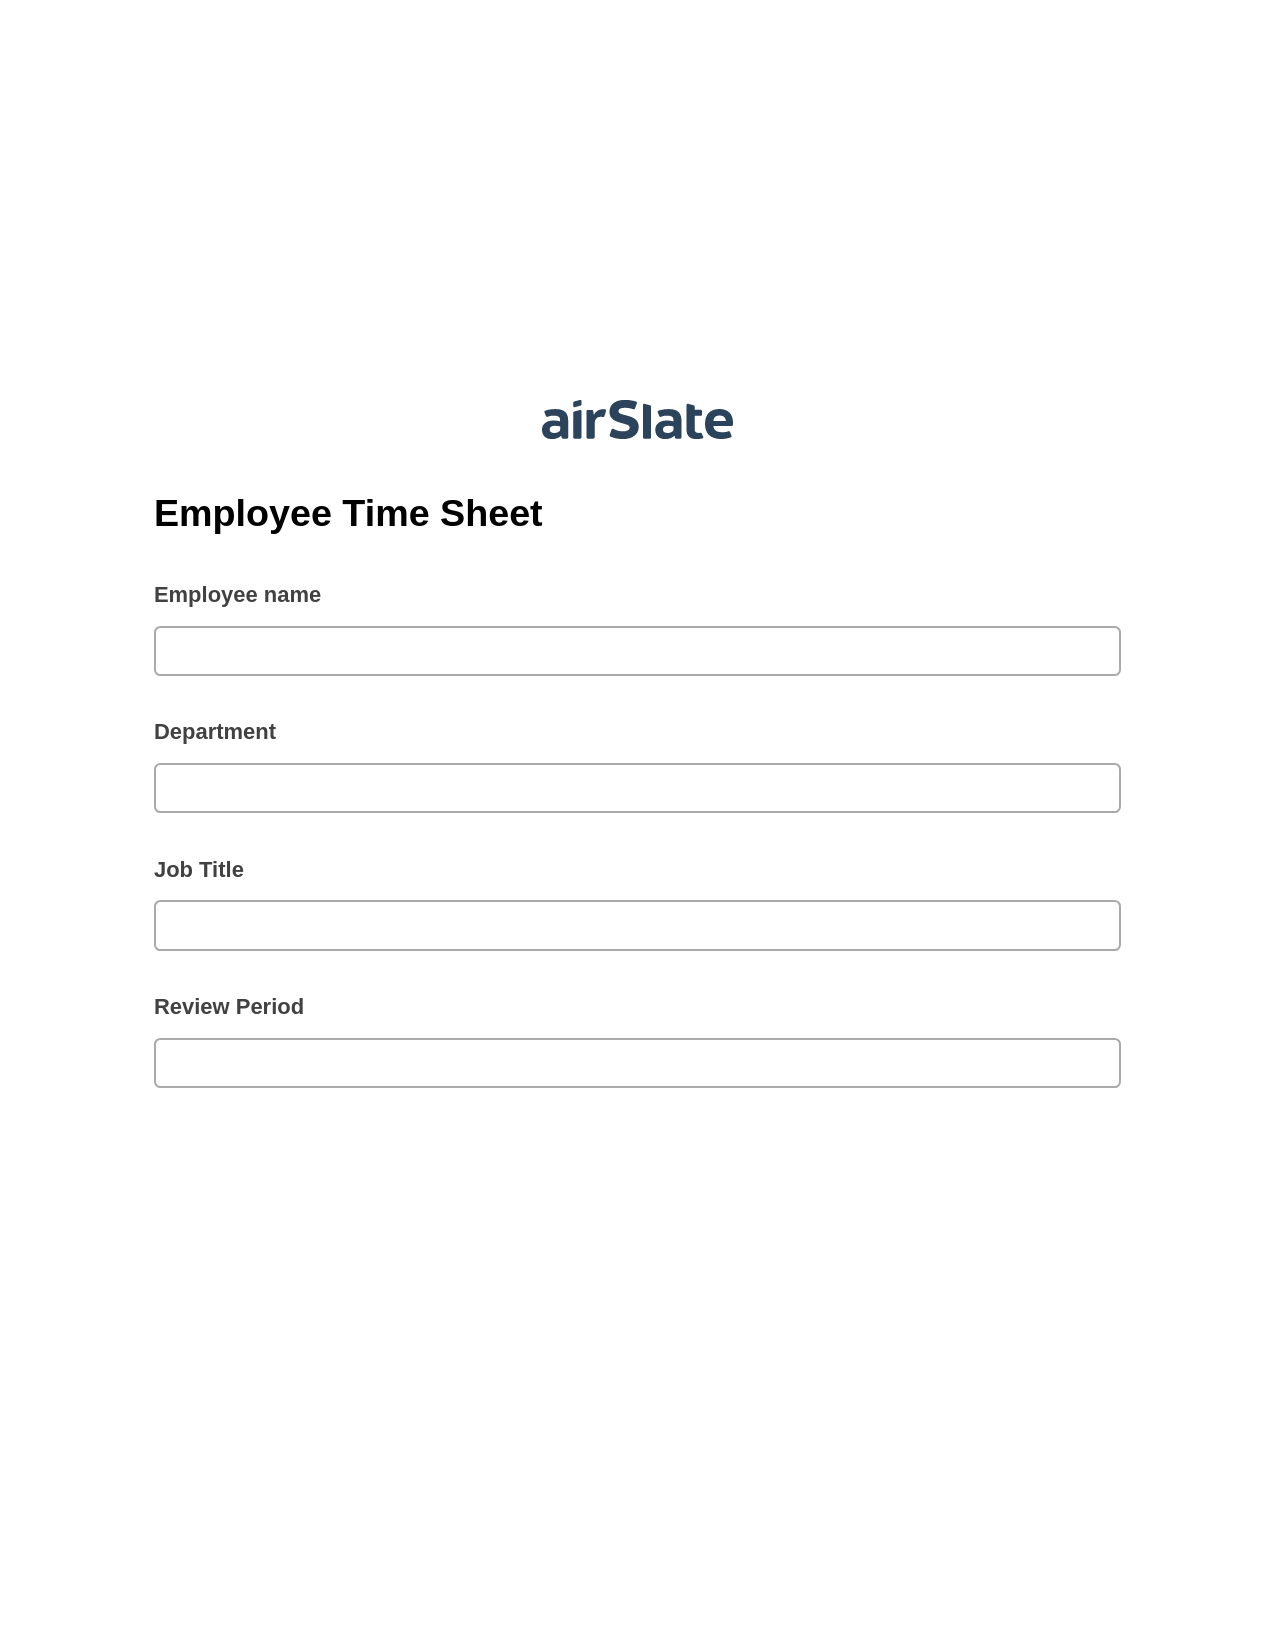 Employee Time Sheet Pre-fill from Office 365 Excel Bot, Create slate addon, Export to Excel 365 Bot